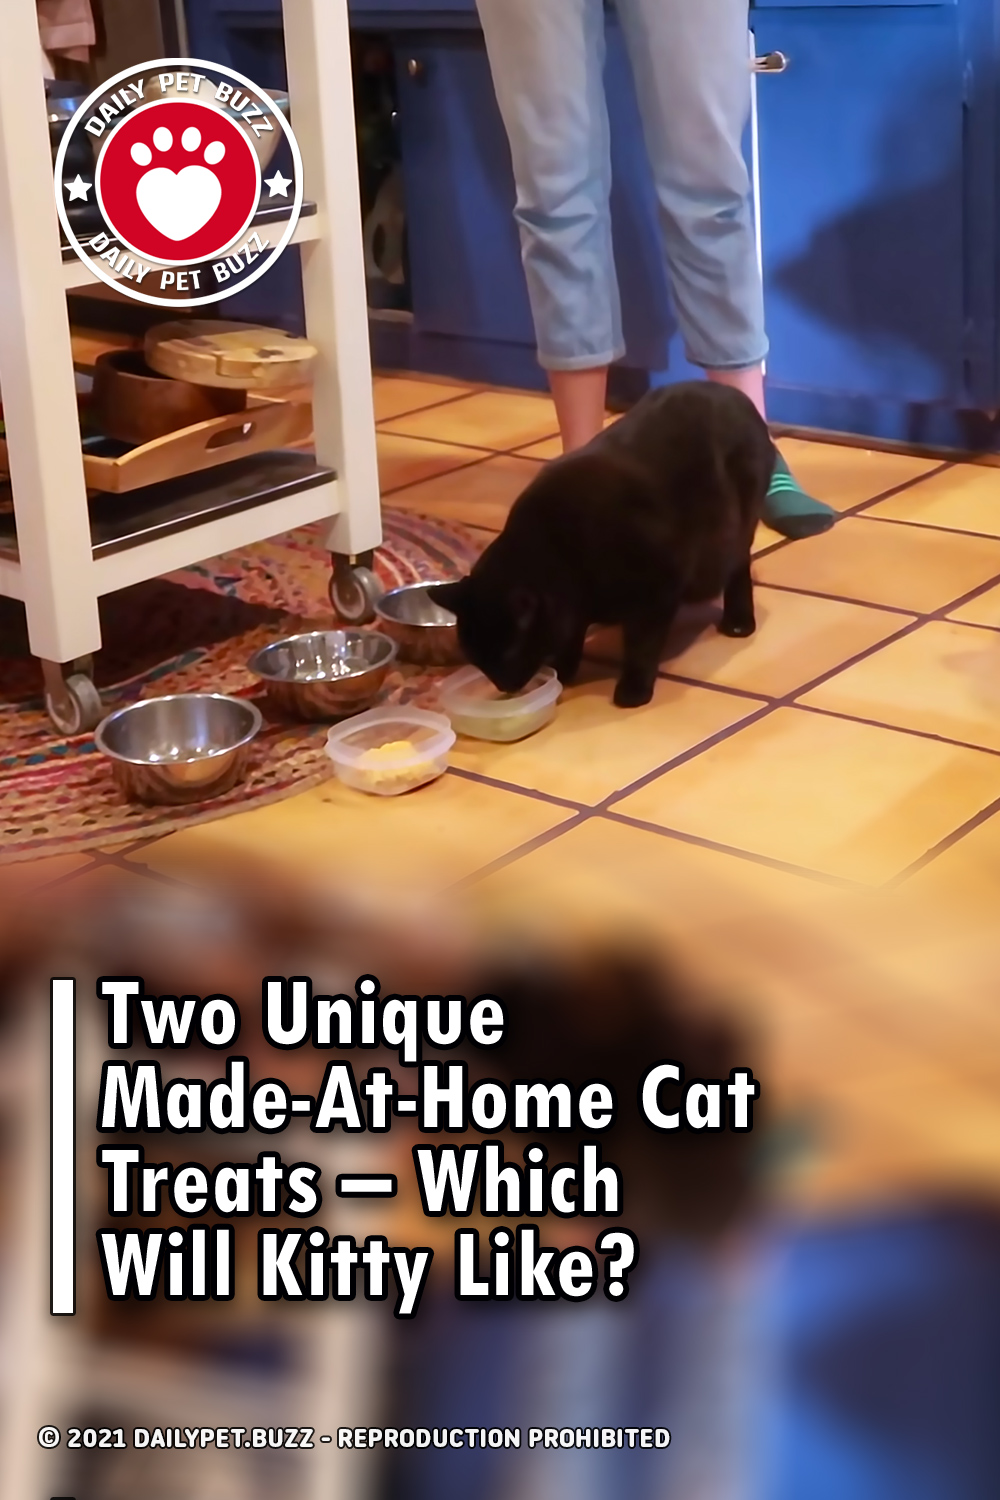 Two Unique Made-At-Home Cat Treats - Which Will Kitty Like?